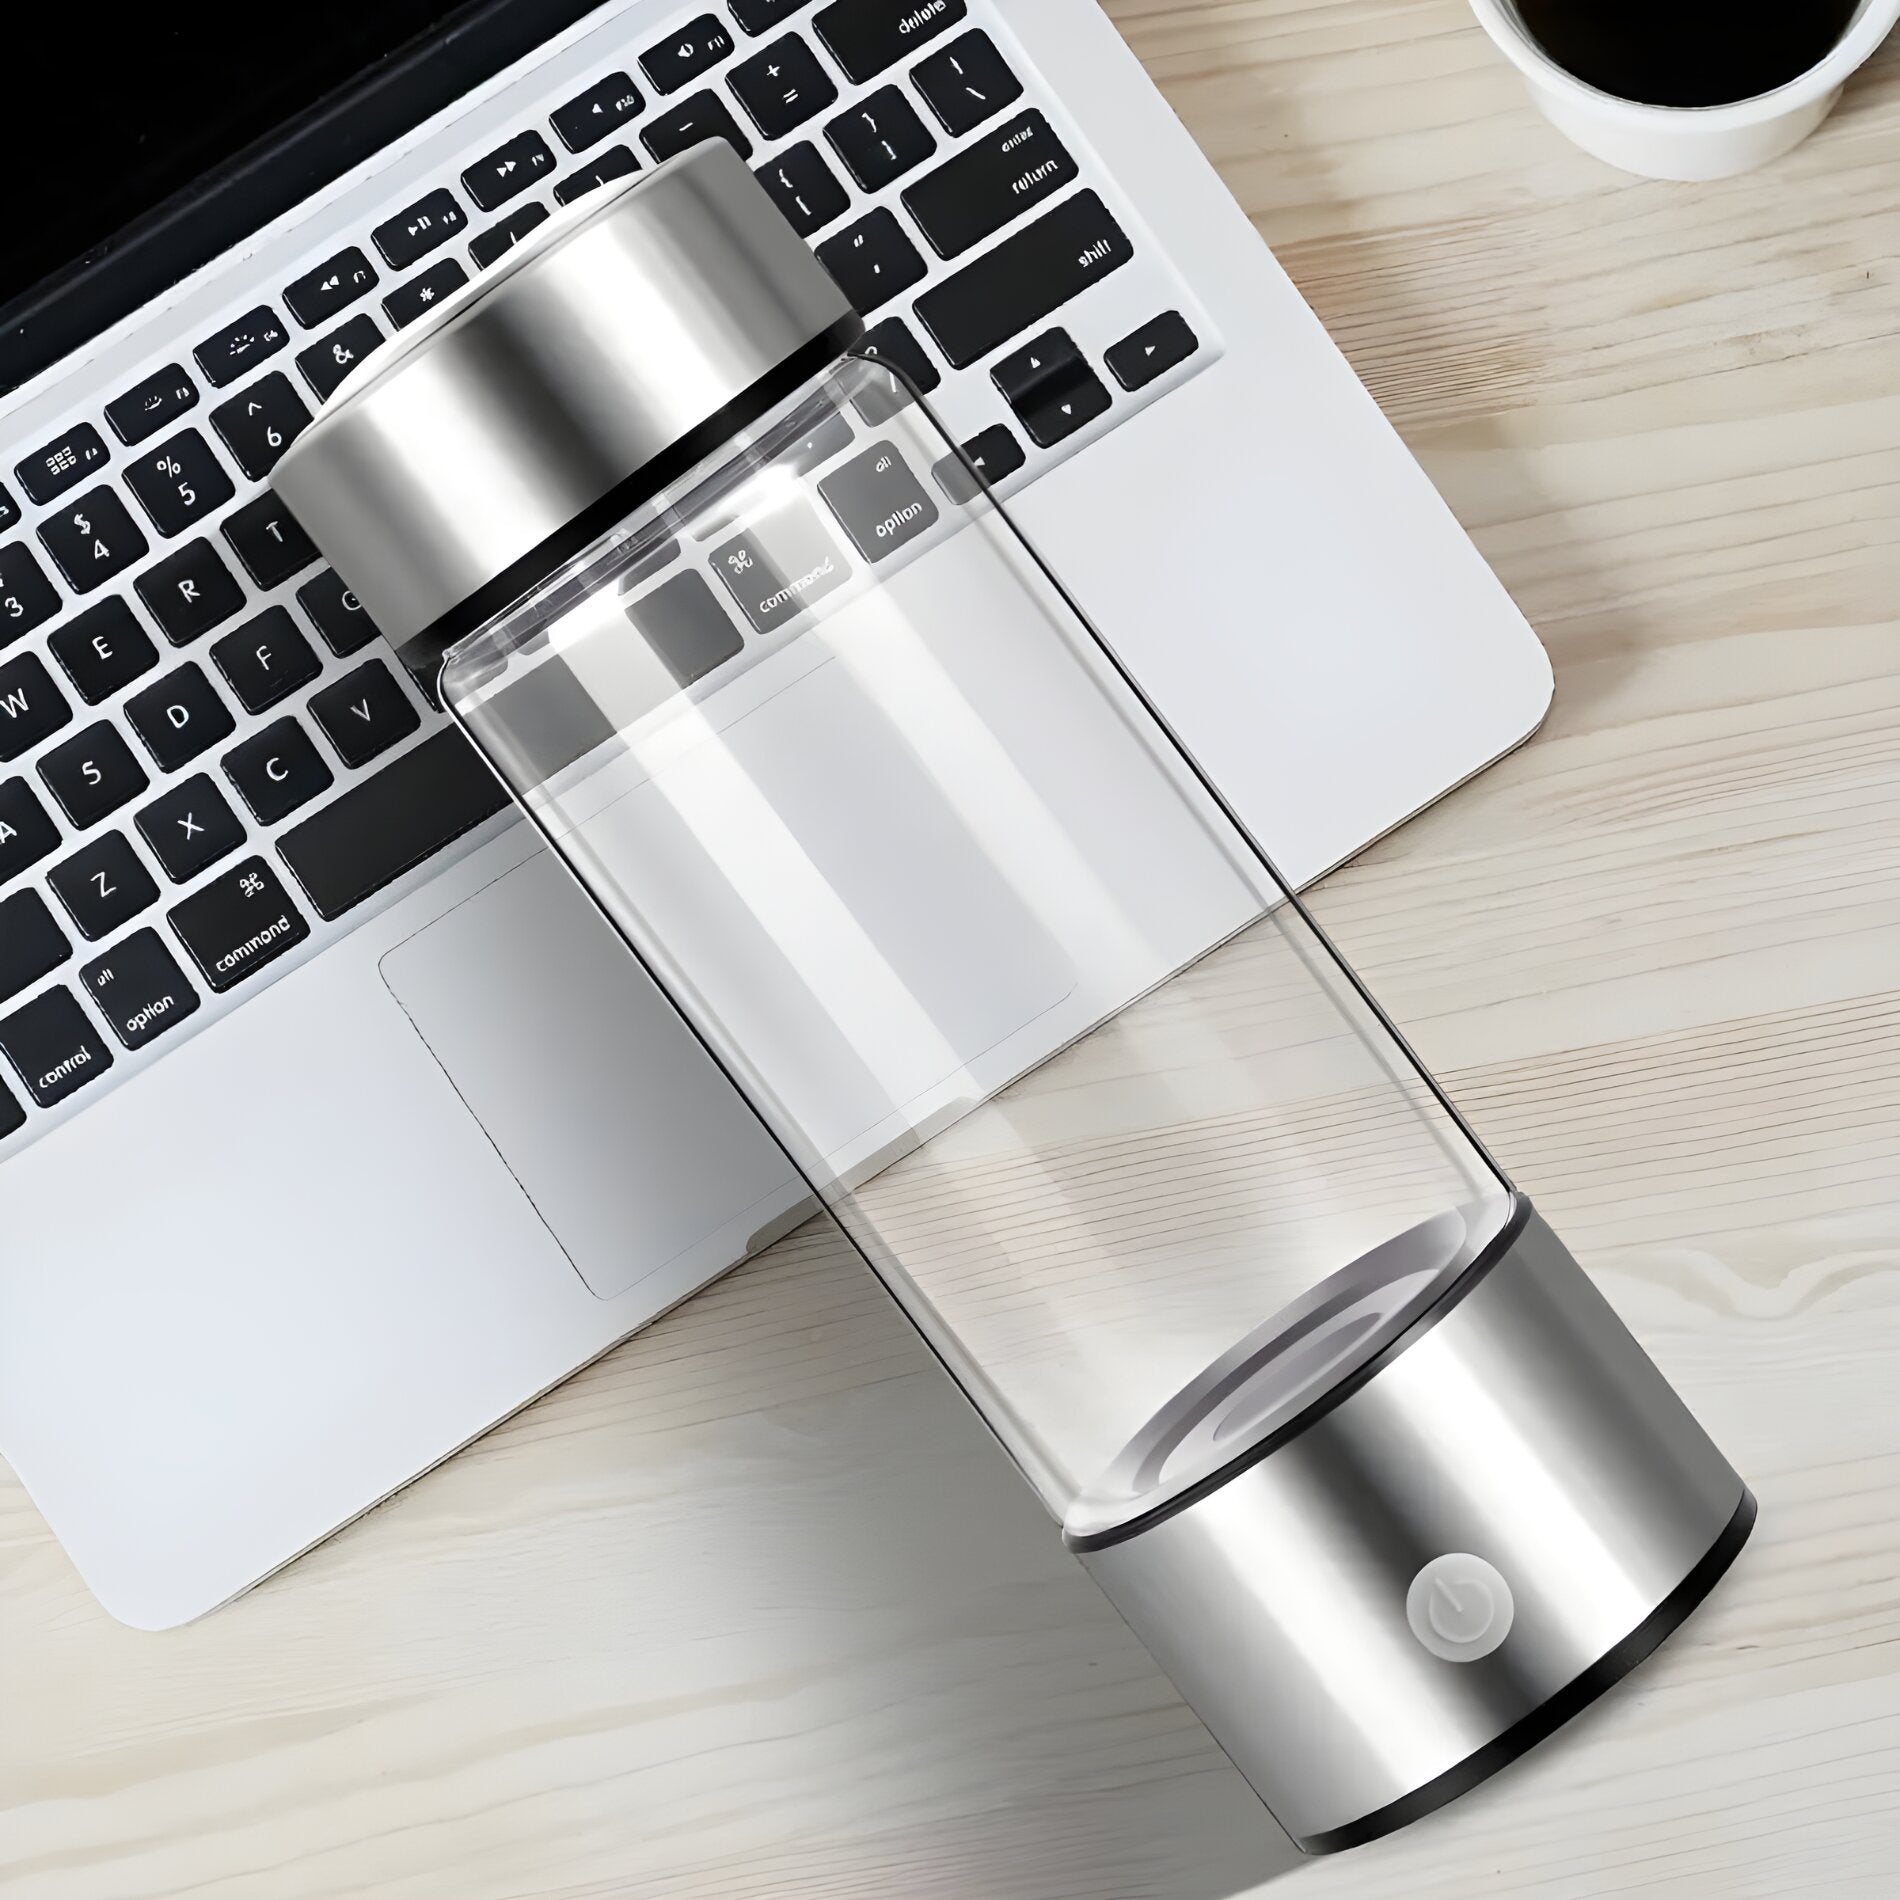 Hydrogen water bottle sitting next to an open laptop and a cup of coffee on a wooden desk, symbolizing a healthy work-life balance.